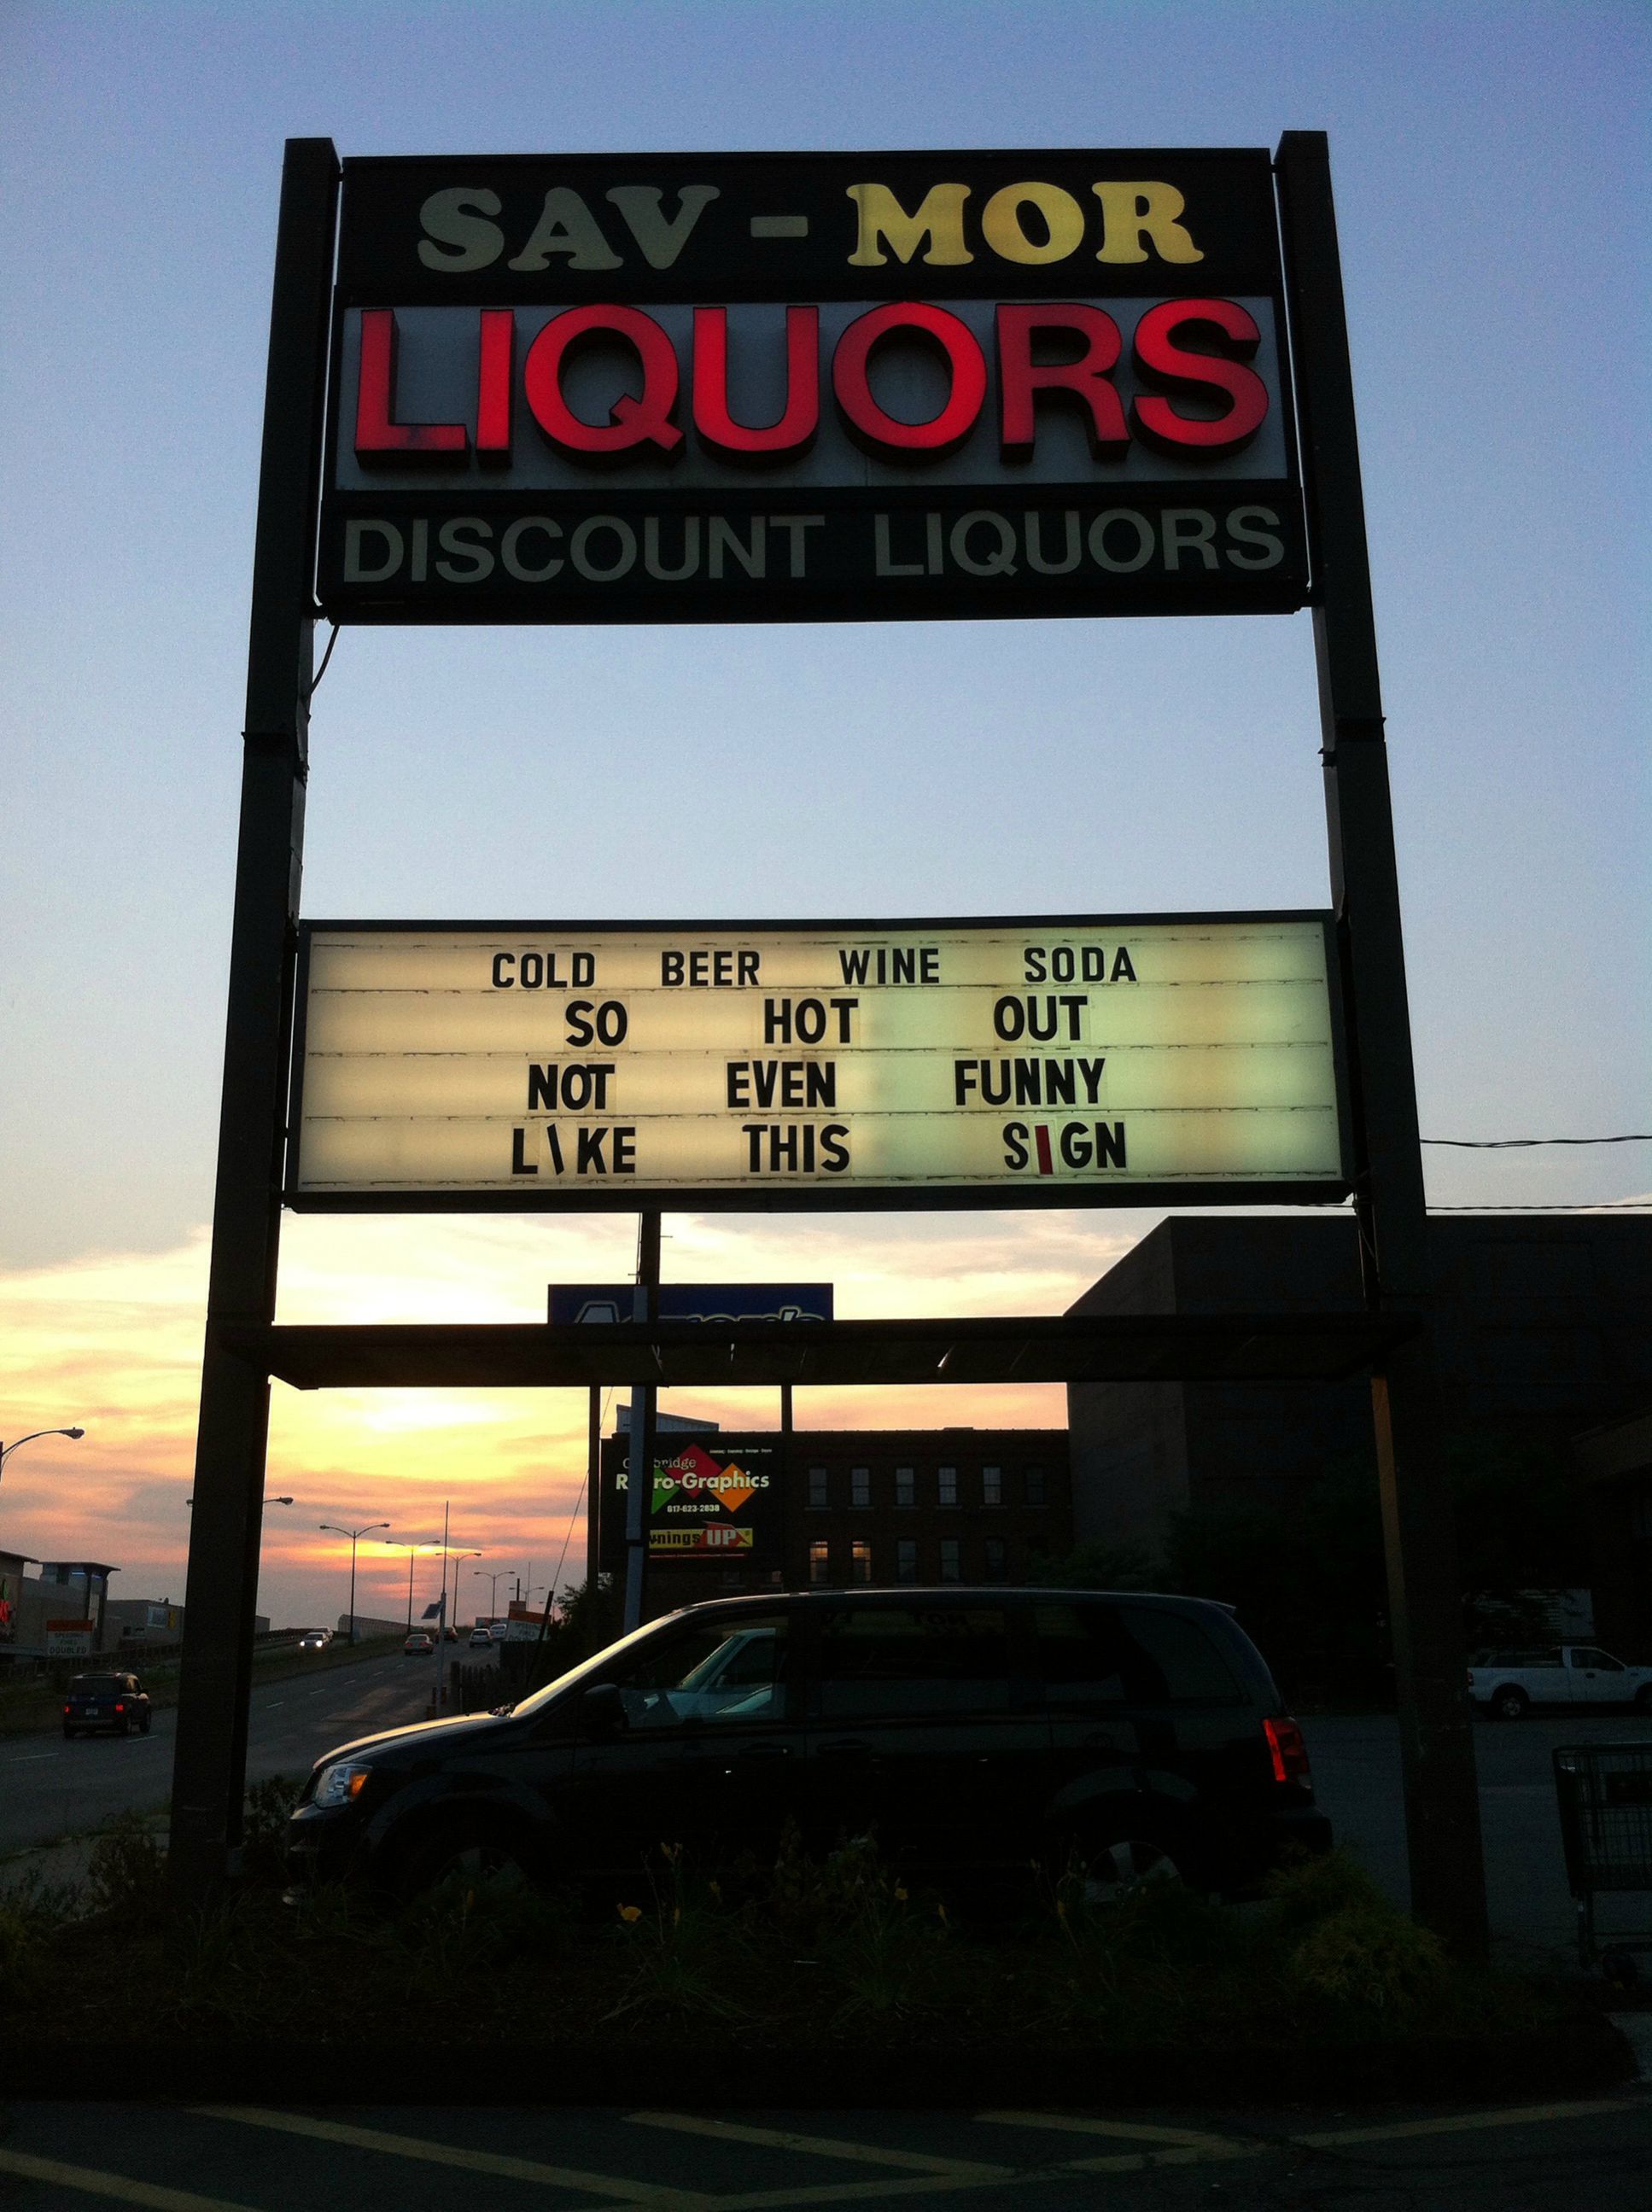 funny liqour signs - | Sav Mor Liquors Discount Liquors Cold Beer Wine Soda So Hot Out Not Even Funny This Sign